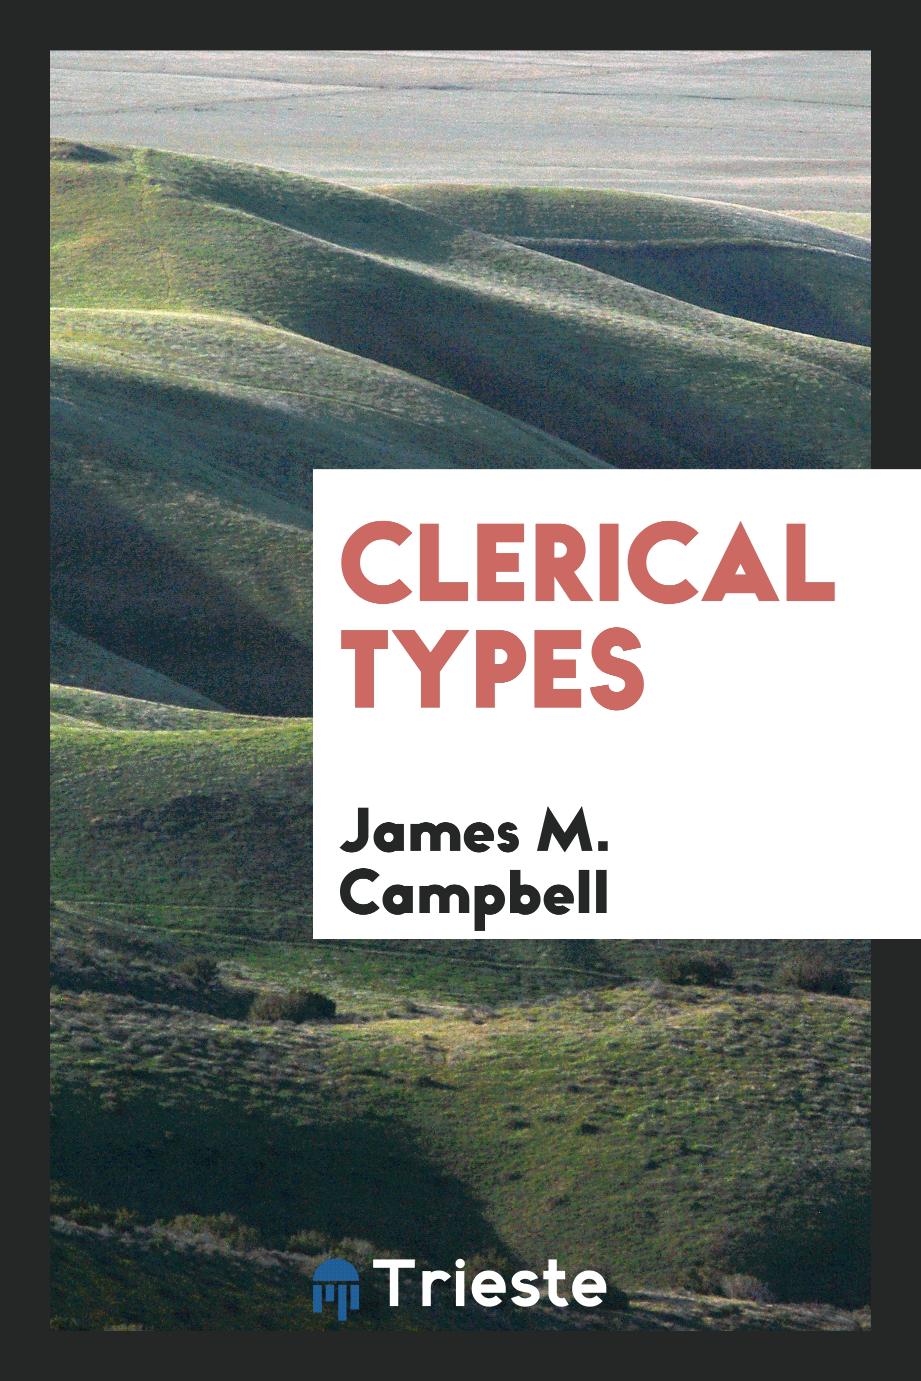 Clerical types